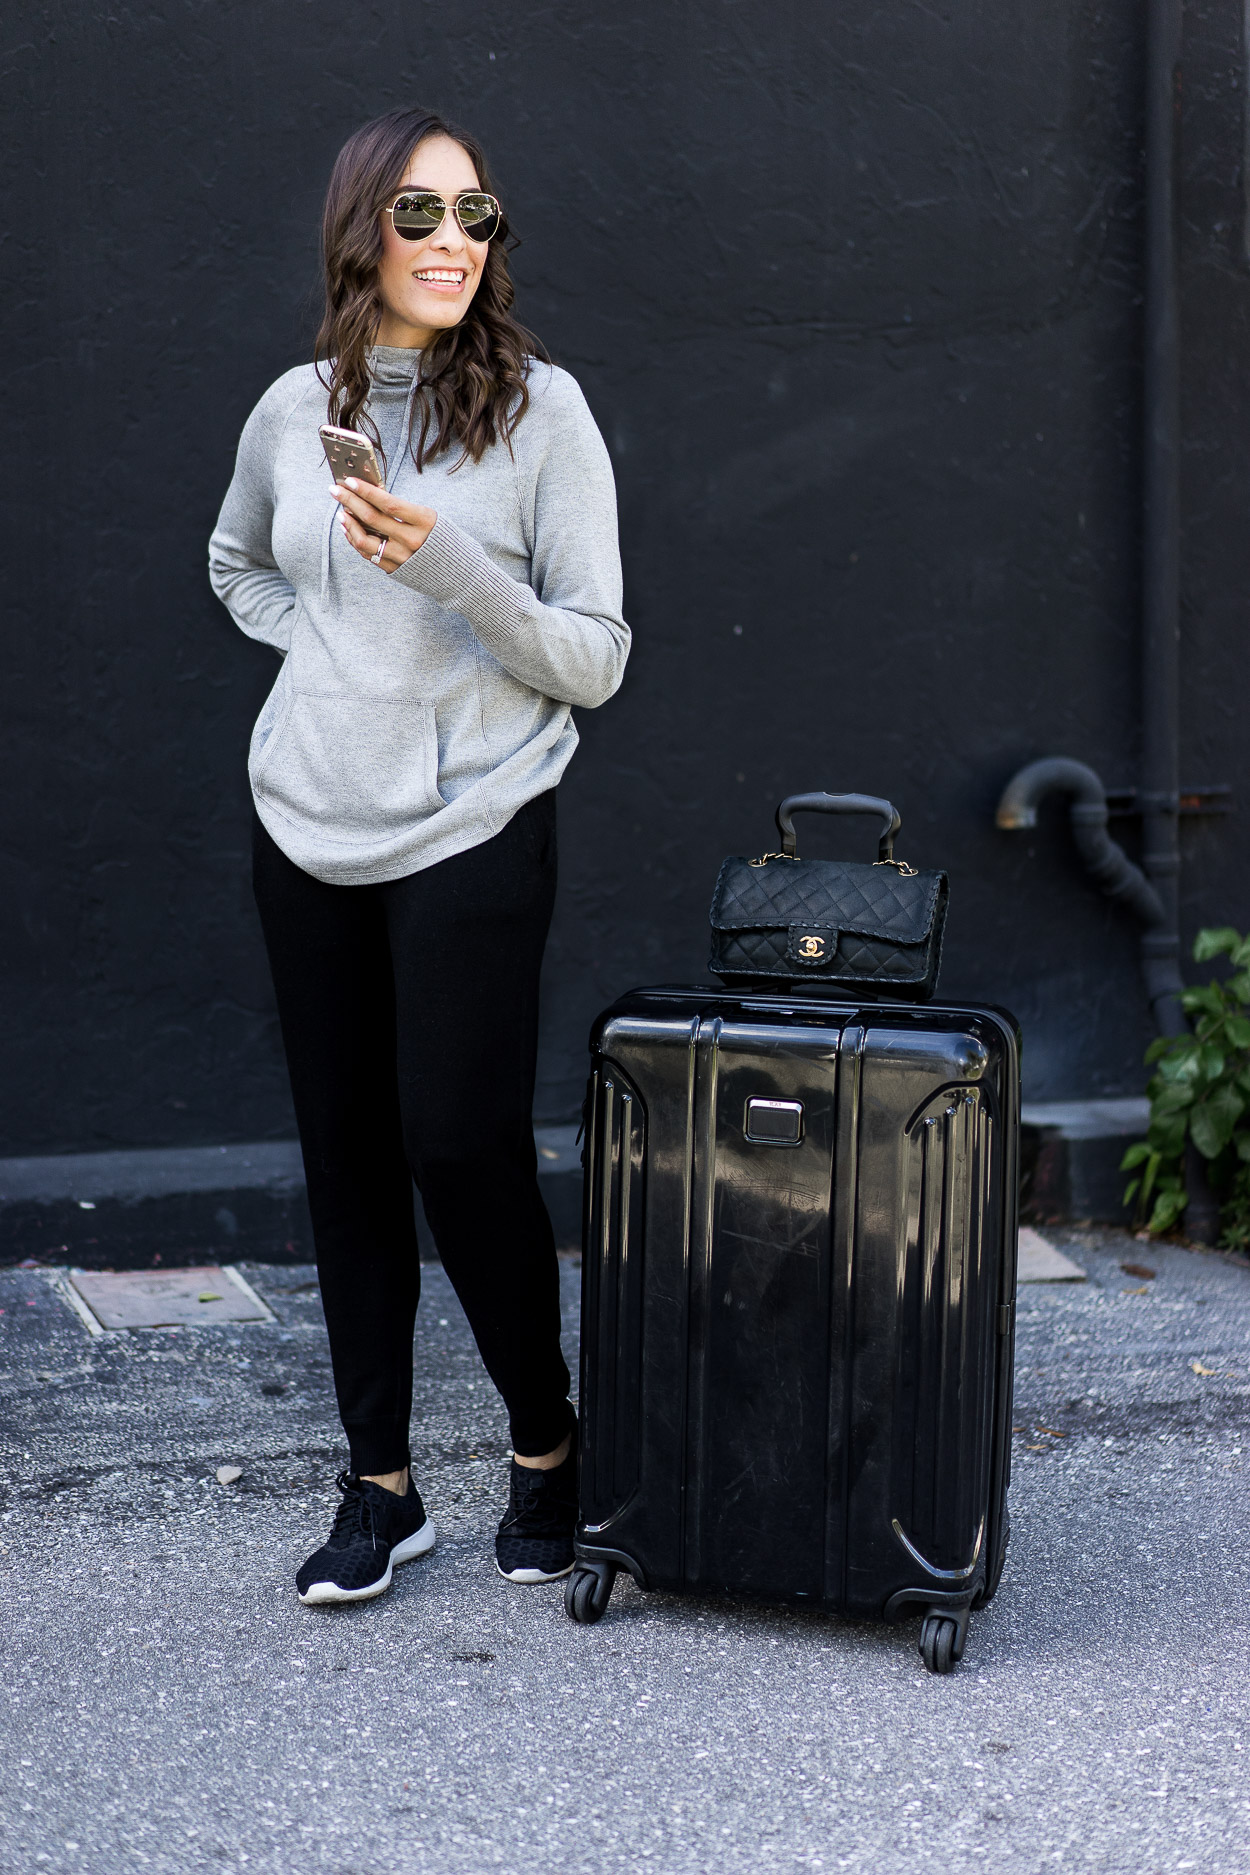 Soft grey cashmere hoodie is worn with Leimere cashmere joggers for easy travel style by Amanda of A Glam Lifestyle blog